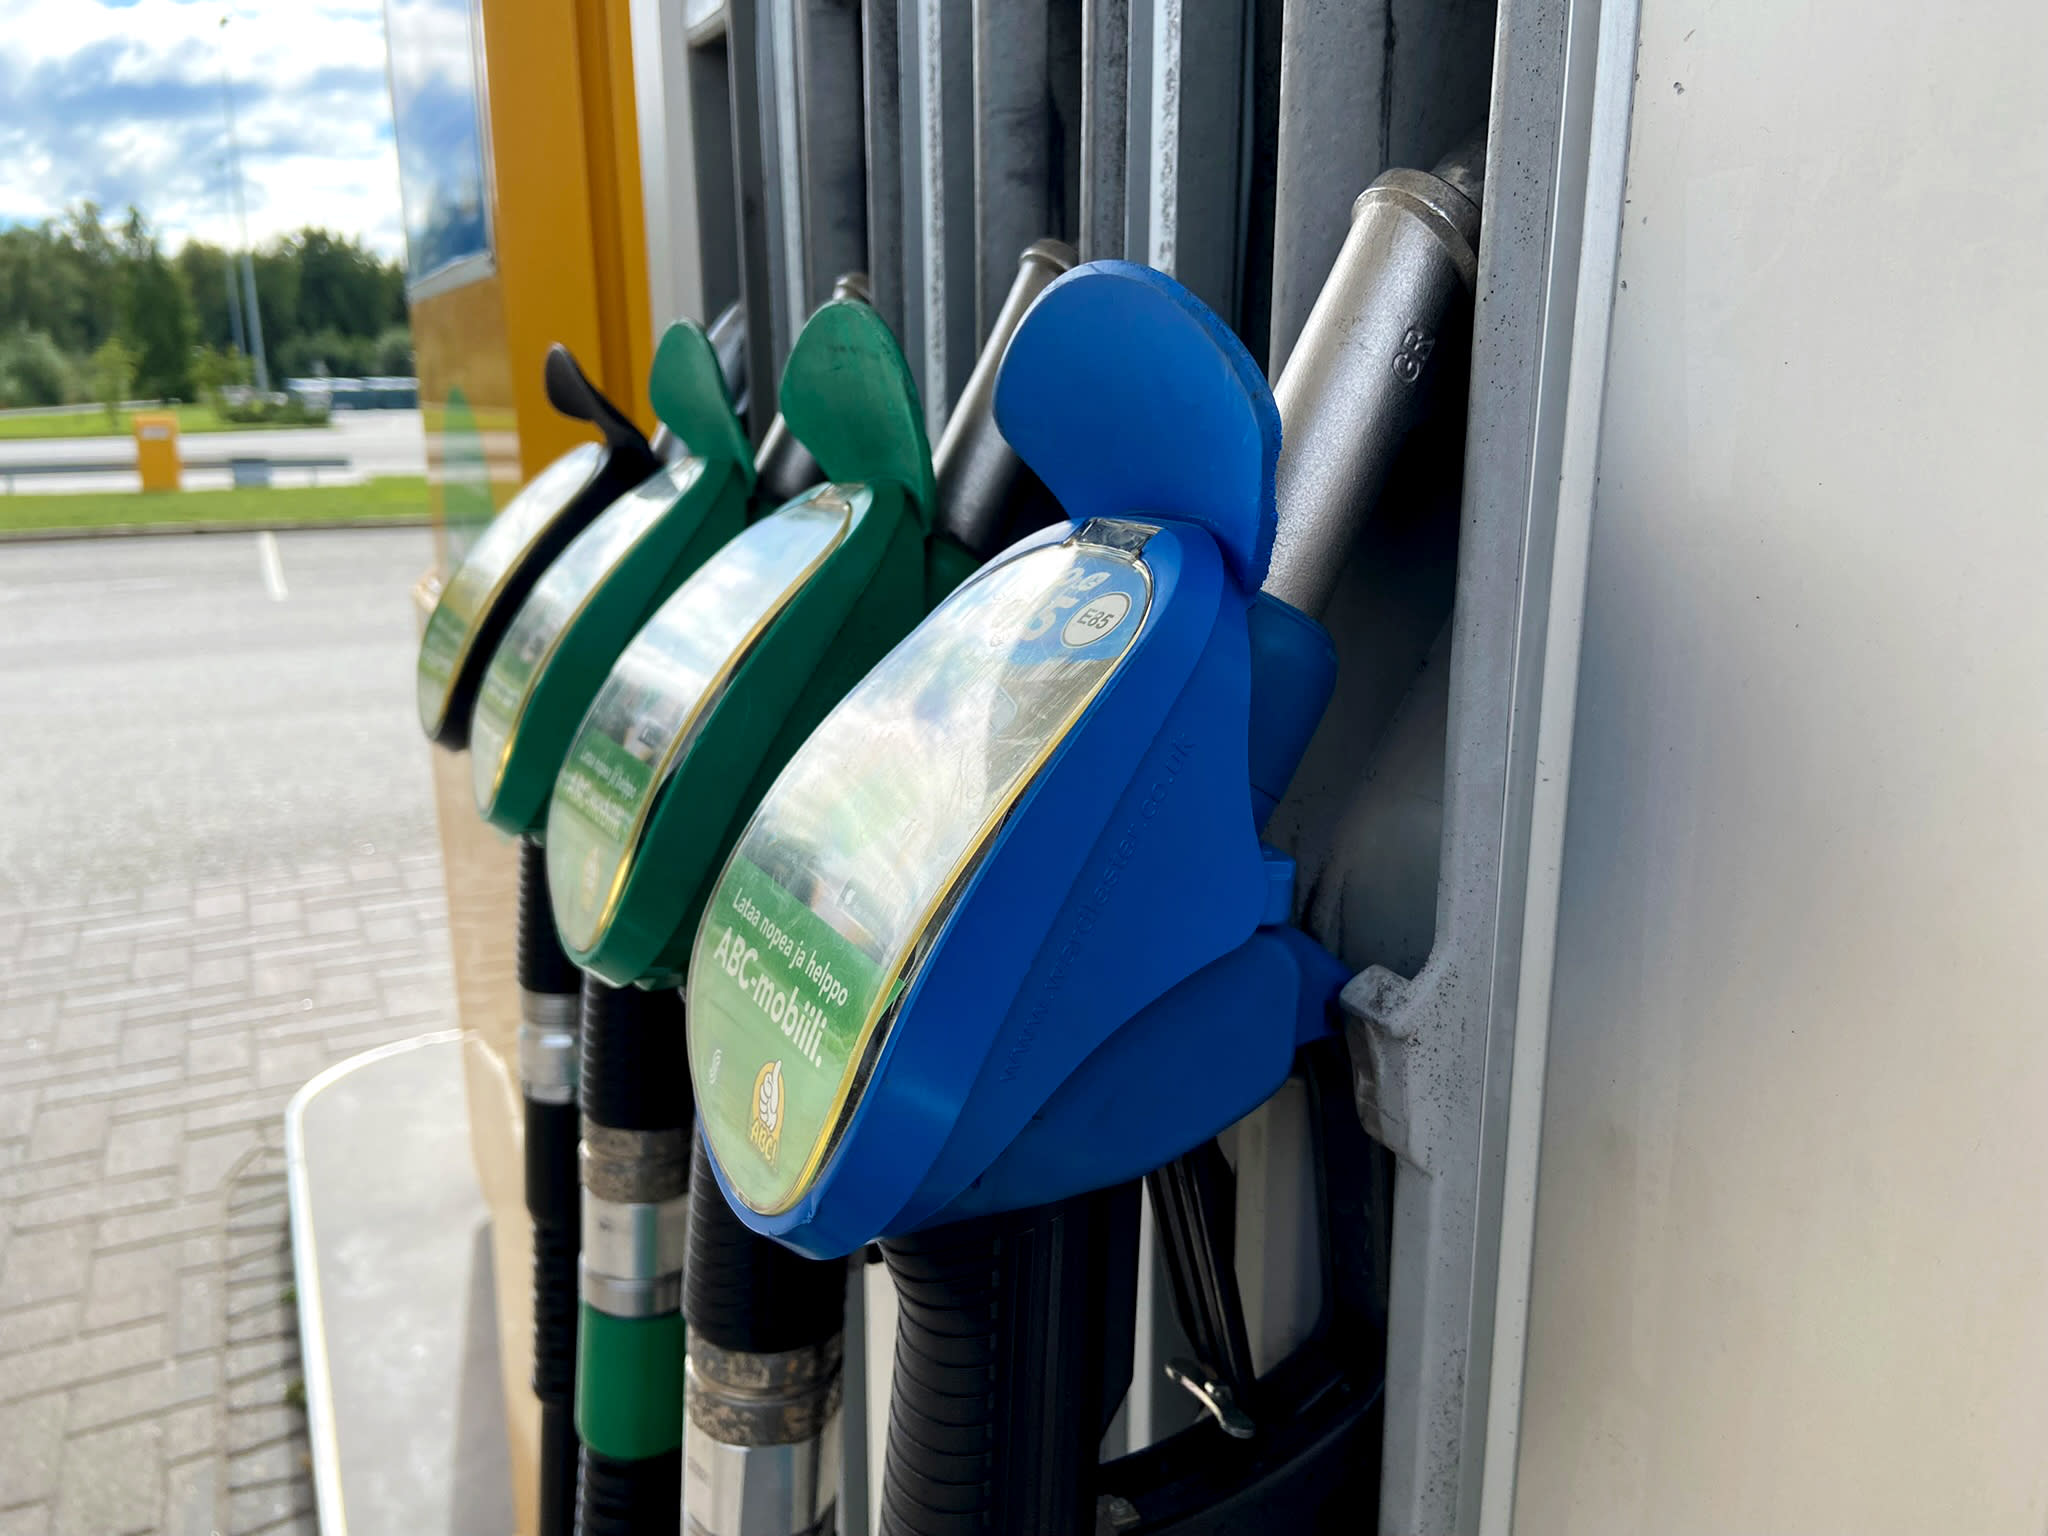 Some gas stations in Lapland fear a fuel shortage